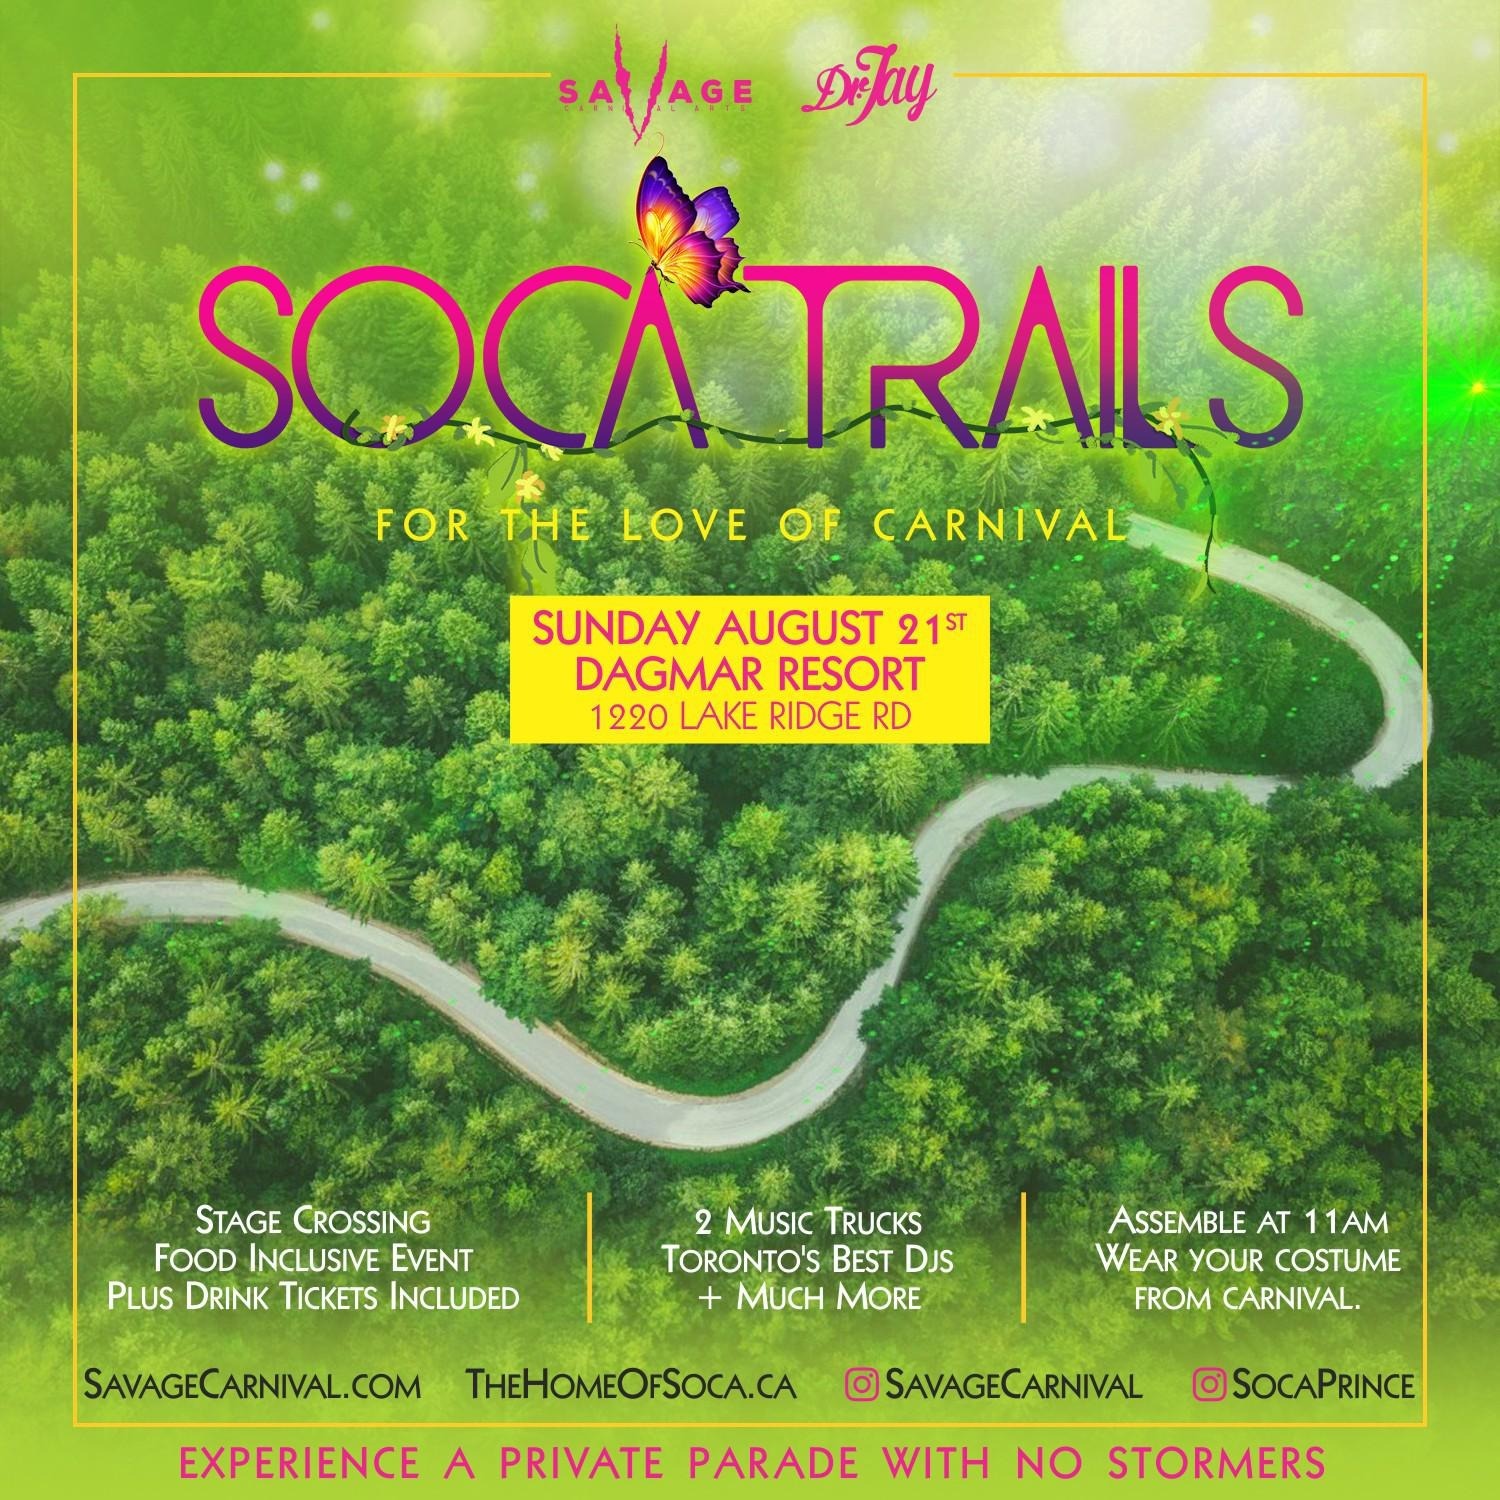 SOCA TRAILS - For the love of Carnival